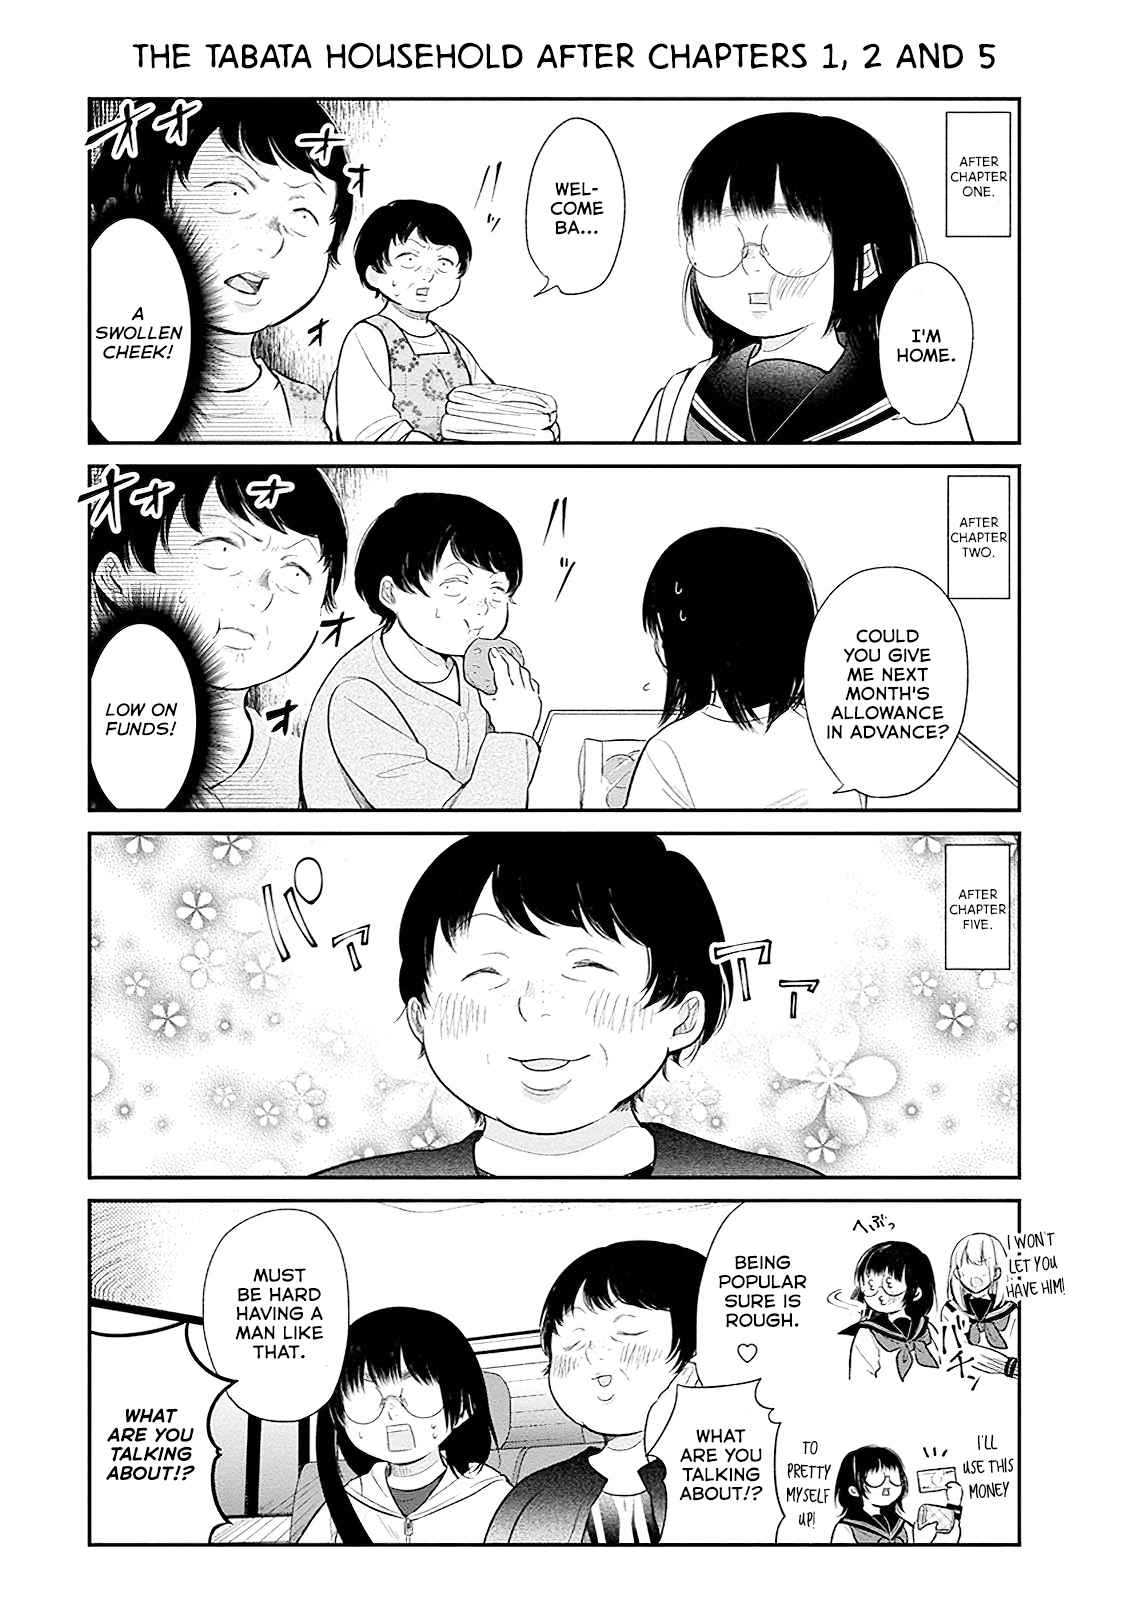 A Bouquet For An Ugly Girl Vol. 1 Ch. 6.5 Volume 1 Extras